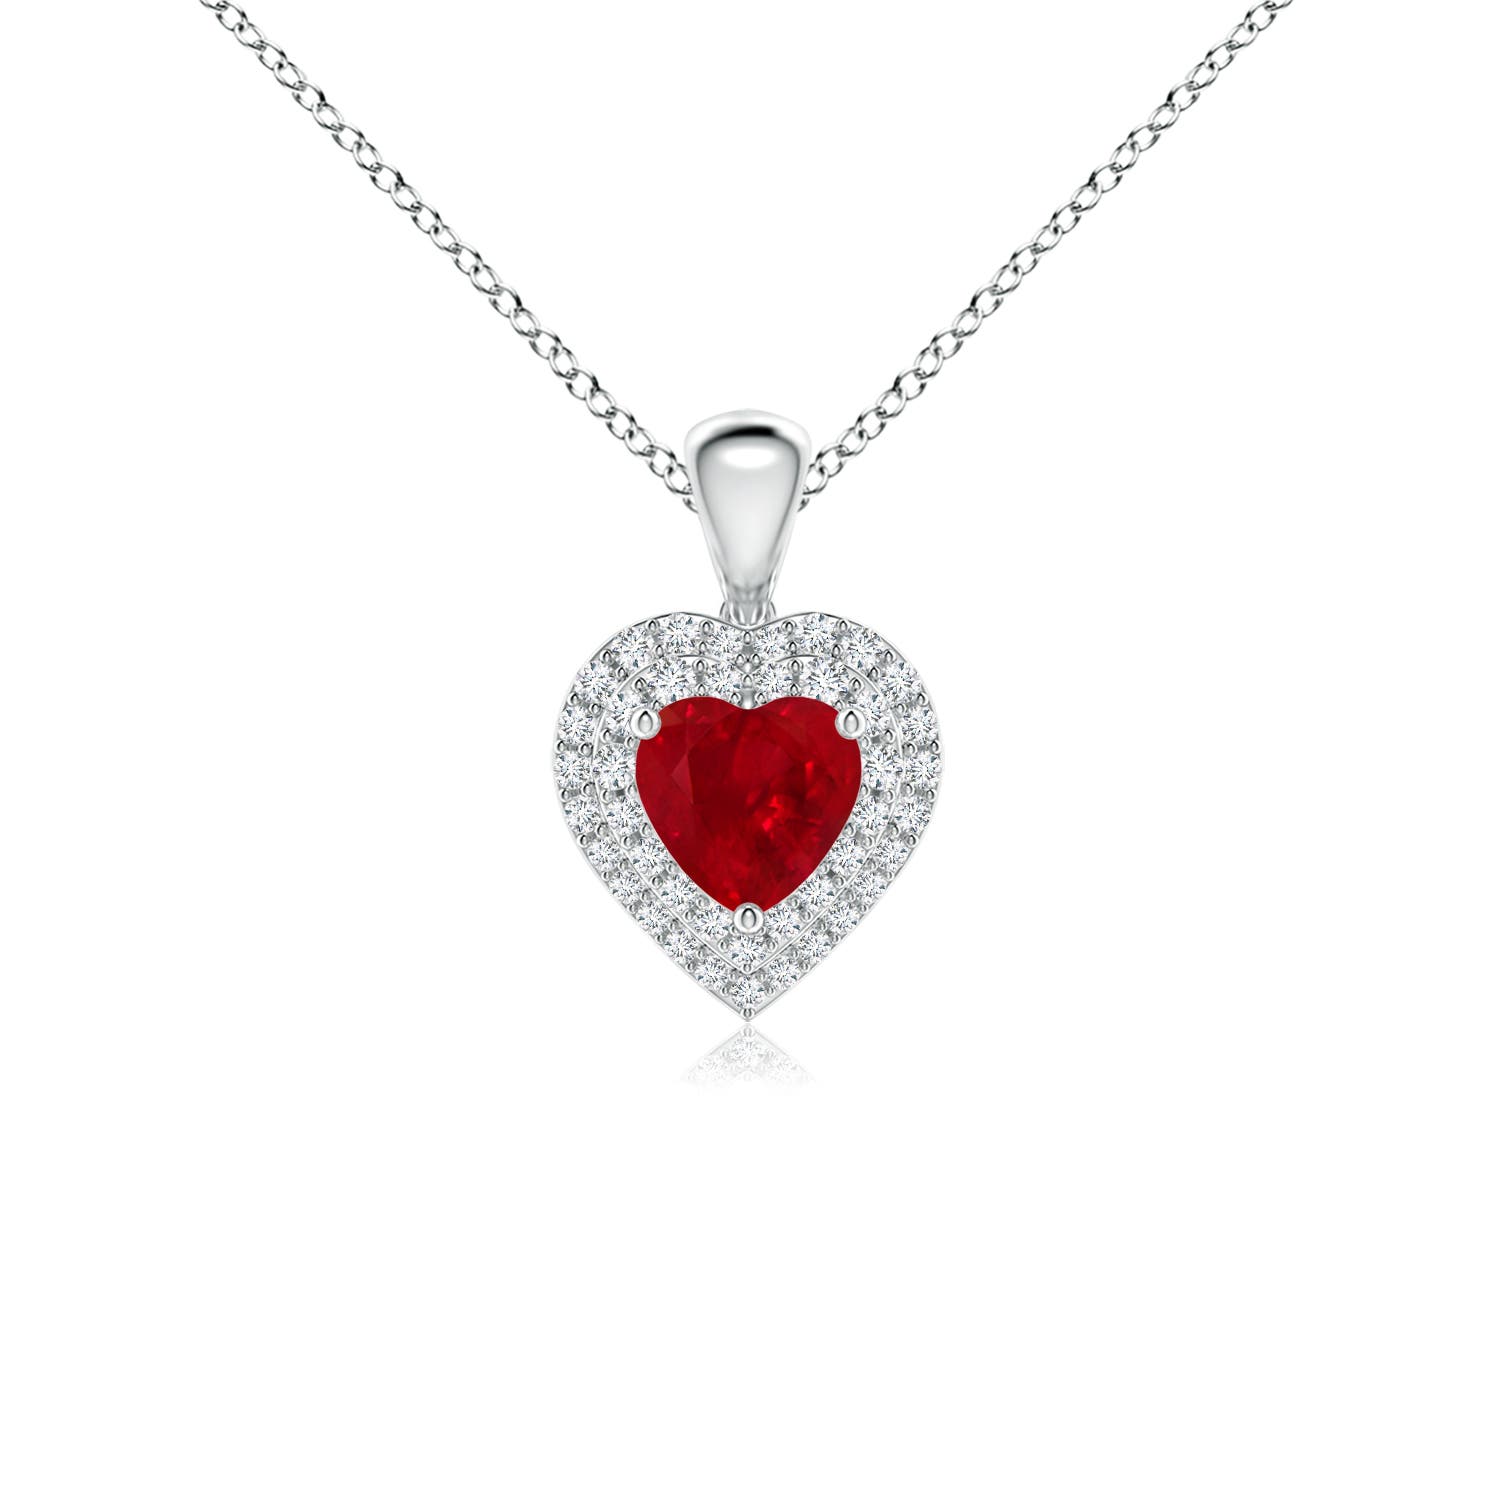 AAA - Ruby / 0.94 CT / 14 KT White Gold